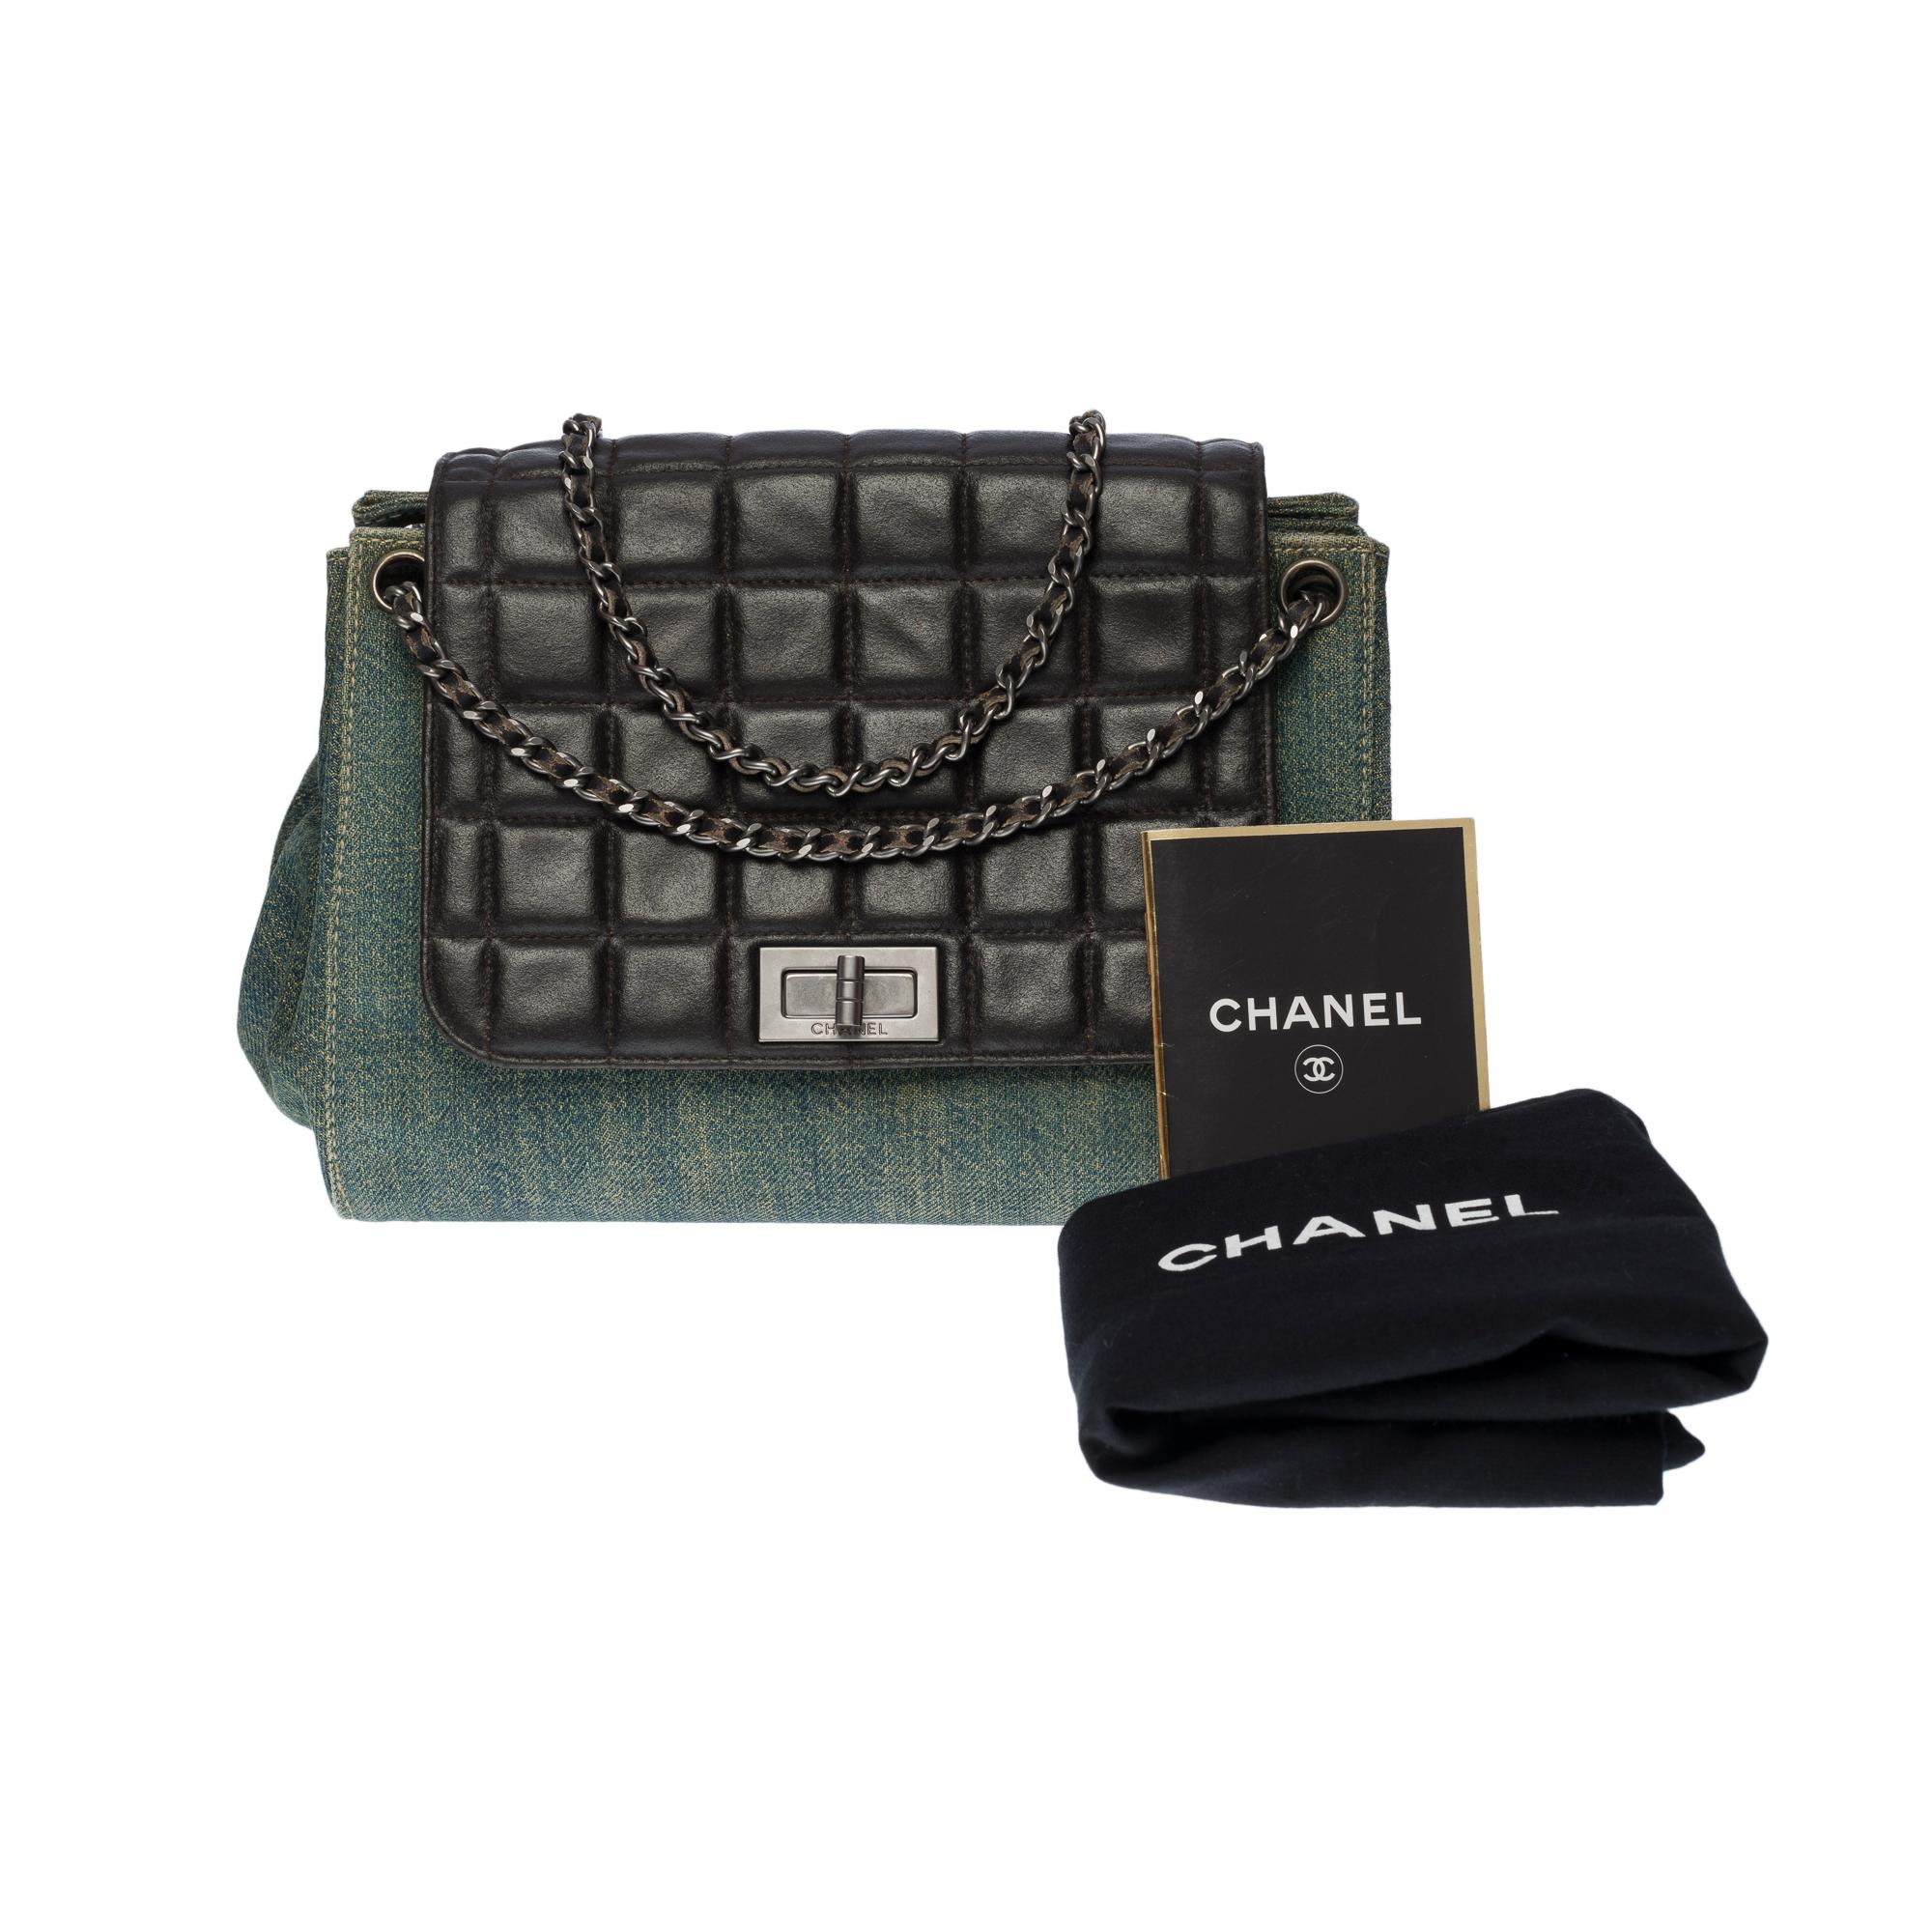 Chanel Classic Chocolate Bar shoulder flap bag in denim and black leather, SHW 7